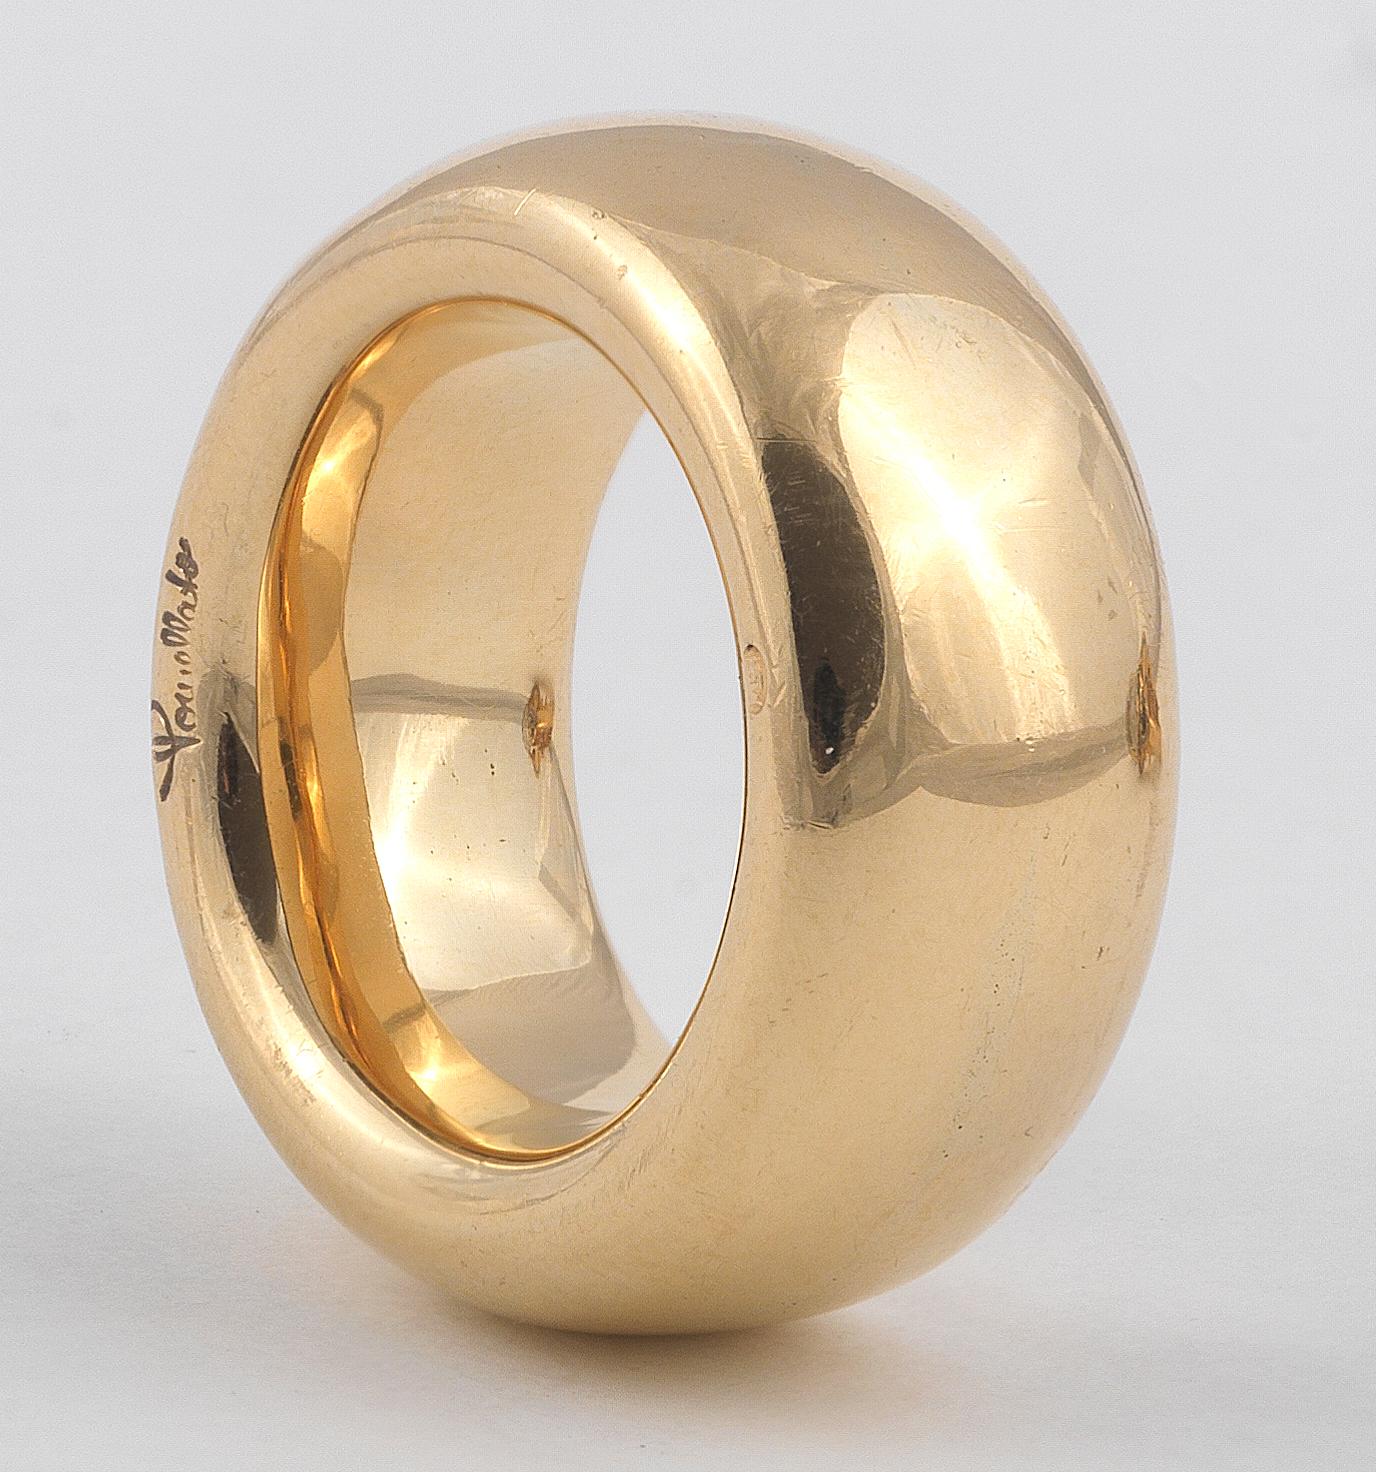 Of classic band design, 18kt yellow Gold 
Signed Pomellato
Weight: 17.4 gr
The size is 5 3/4 
Wide is 11mm